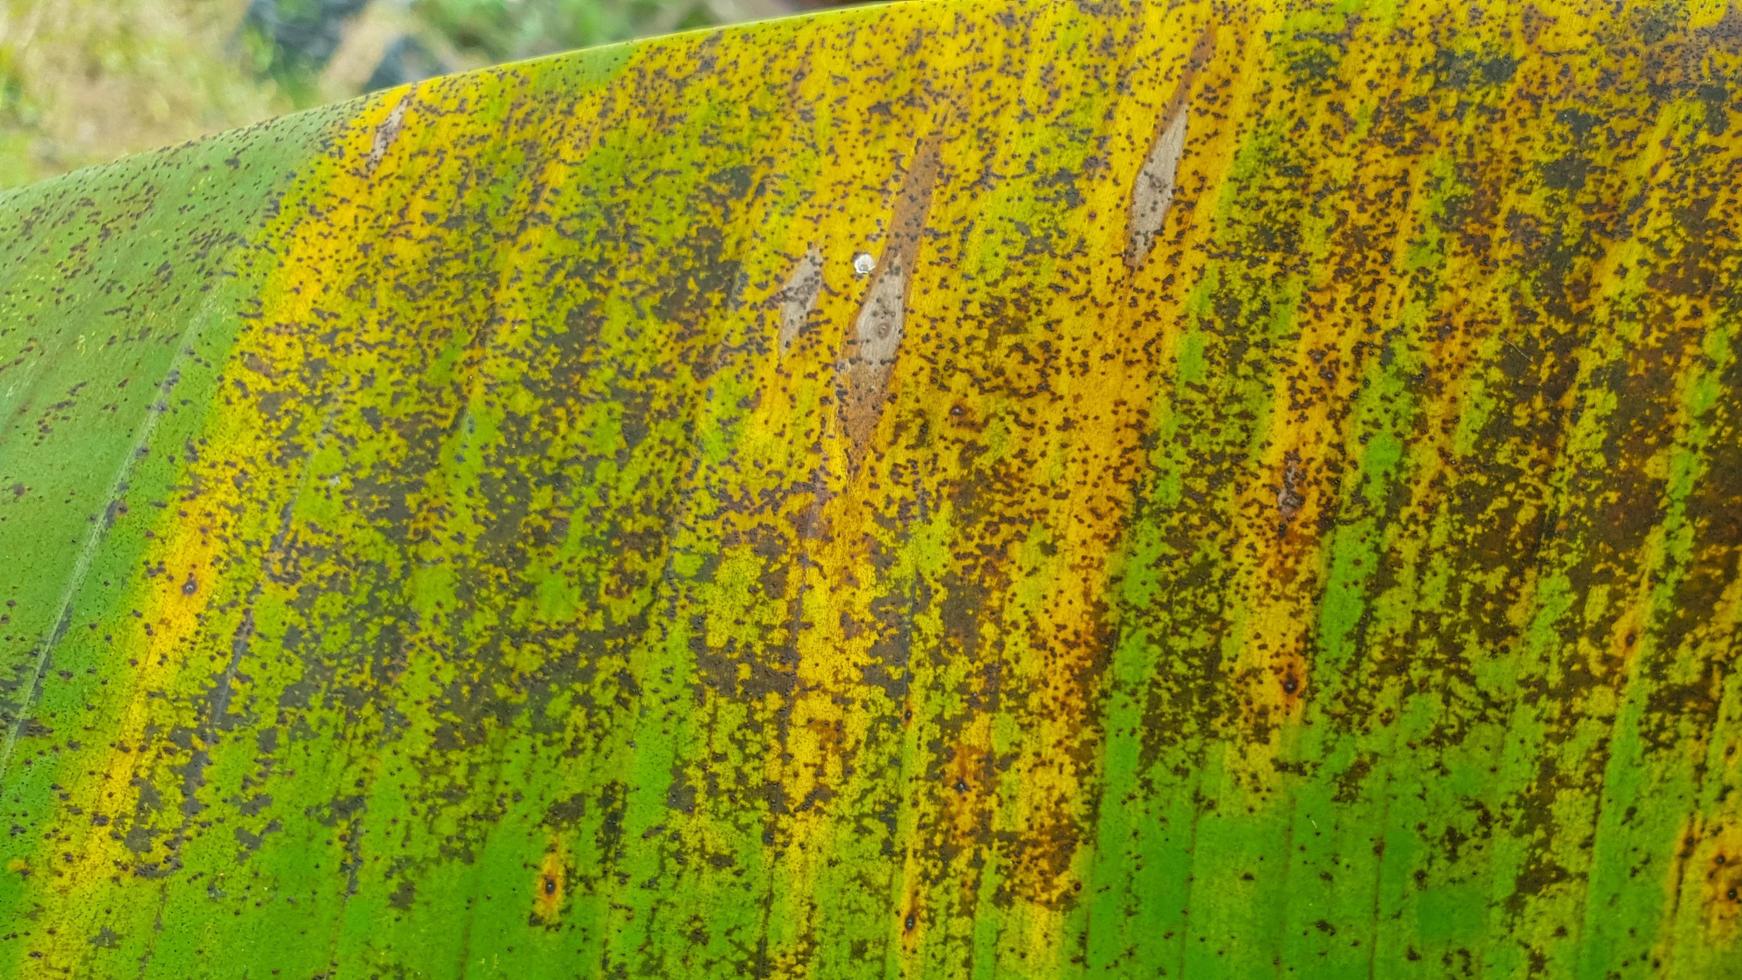 green and brown banana leaf texture photo